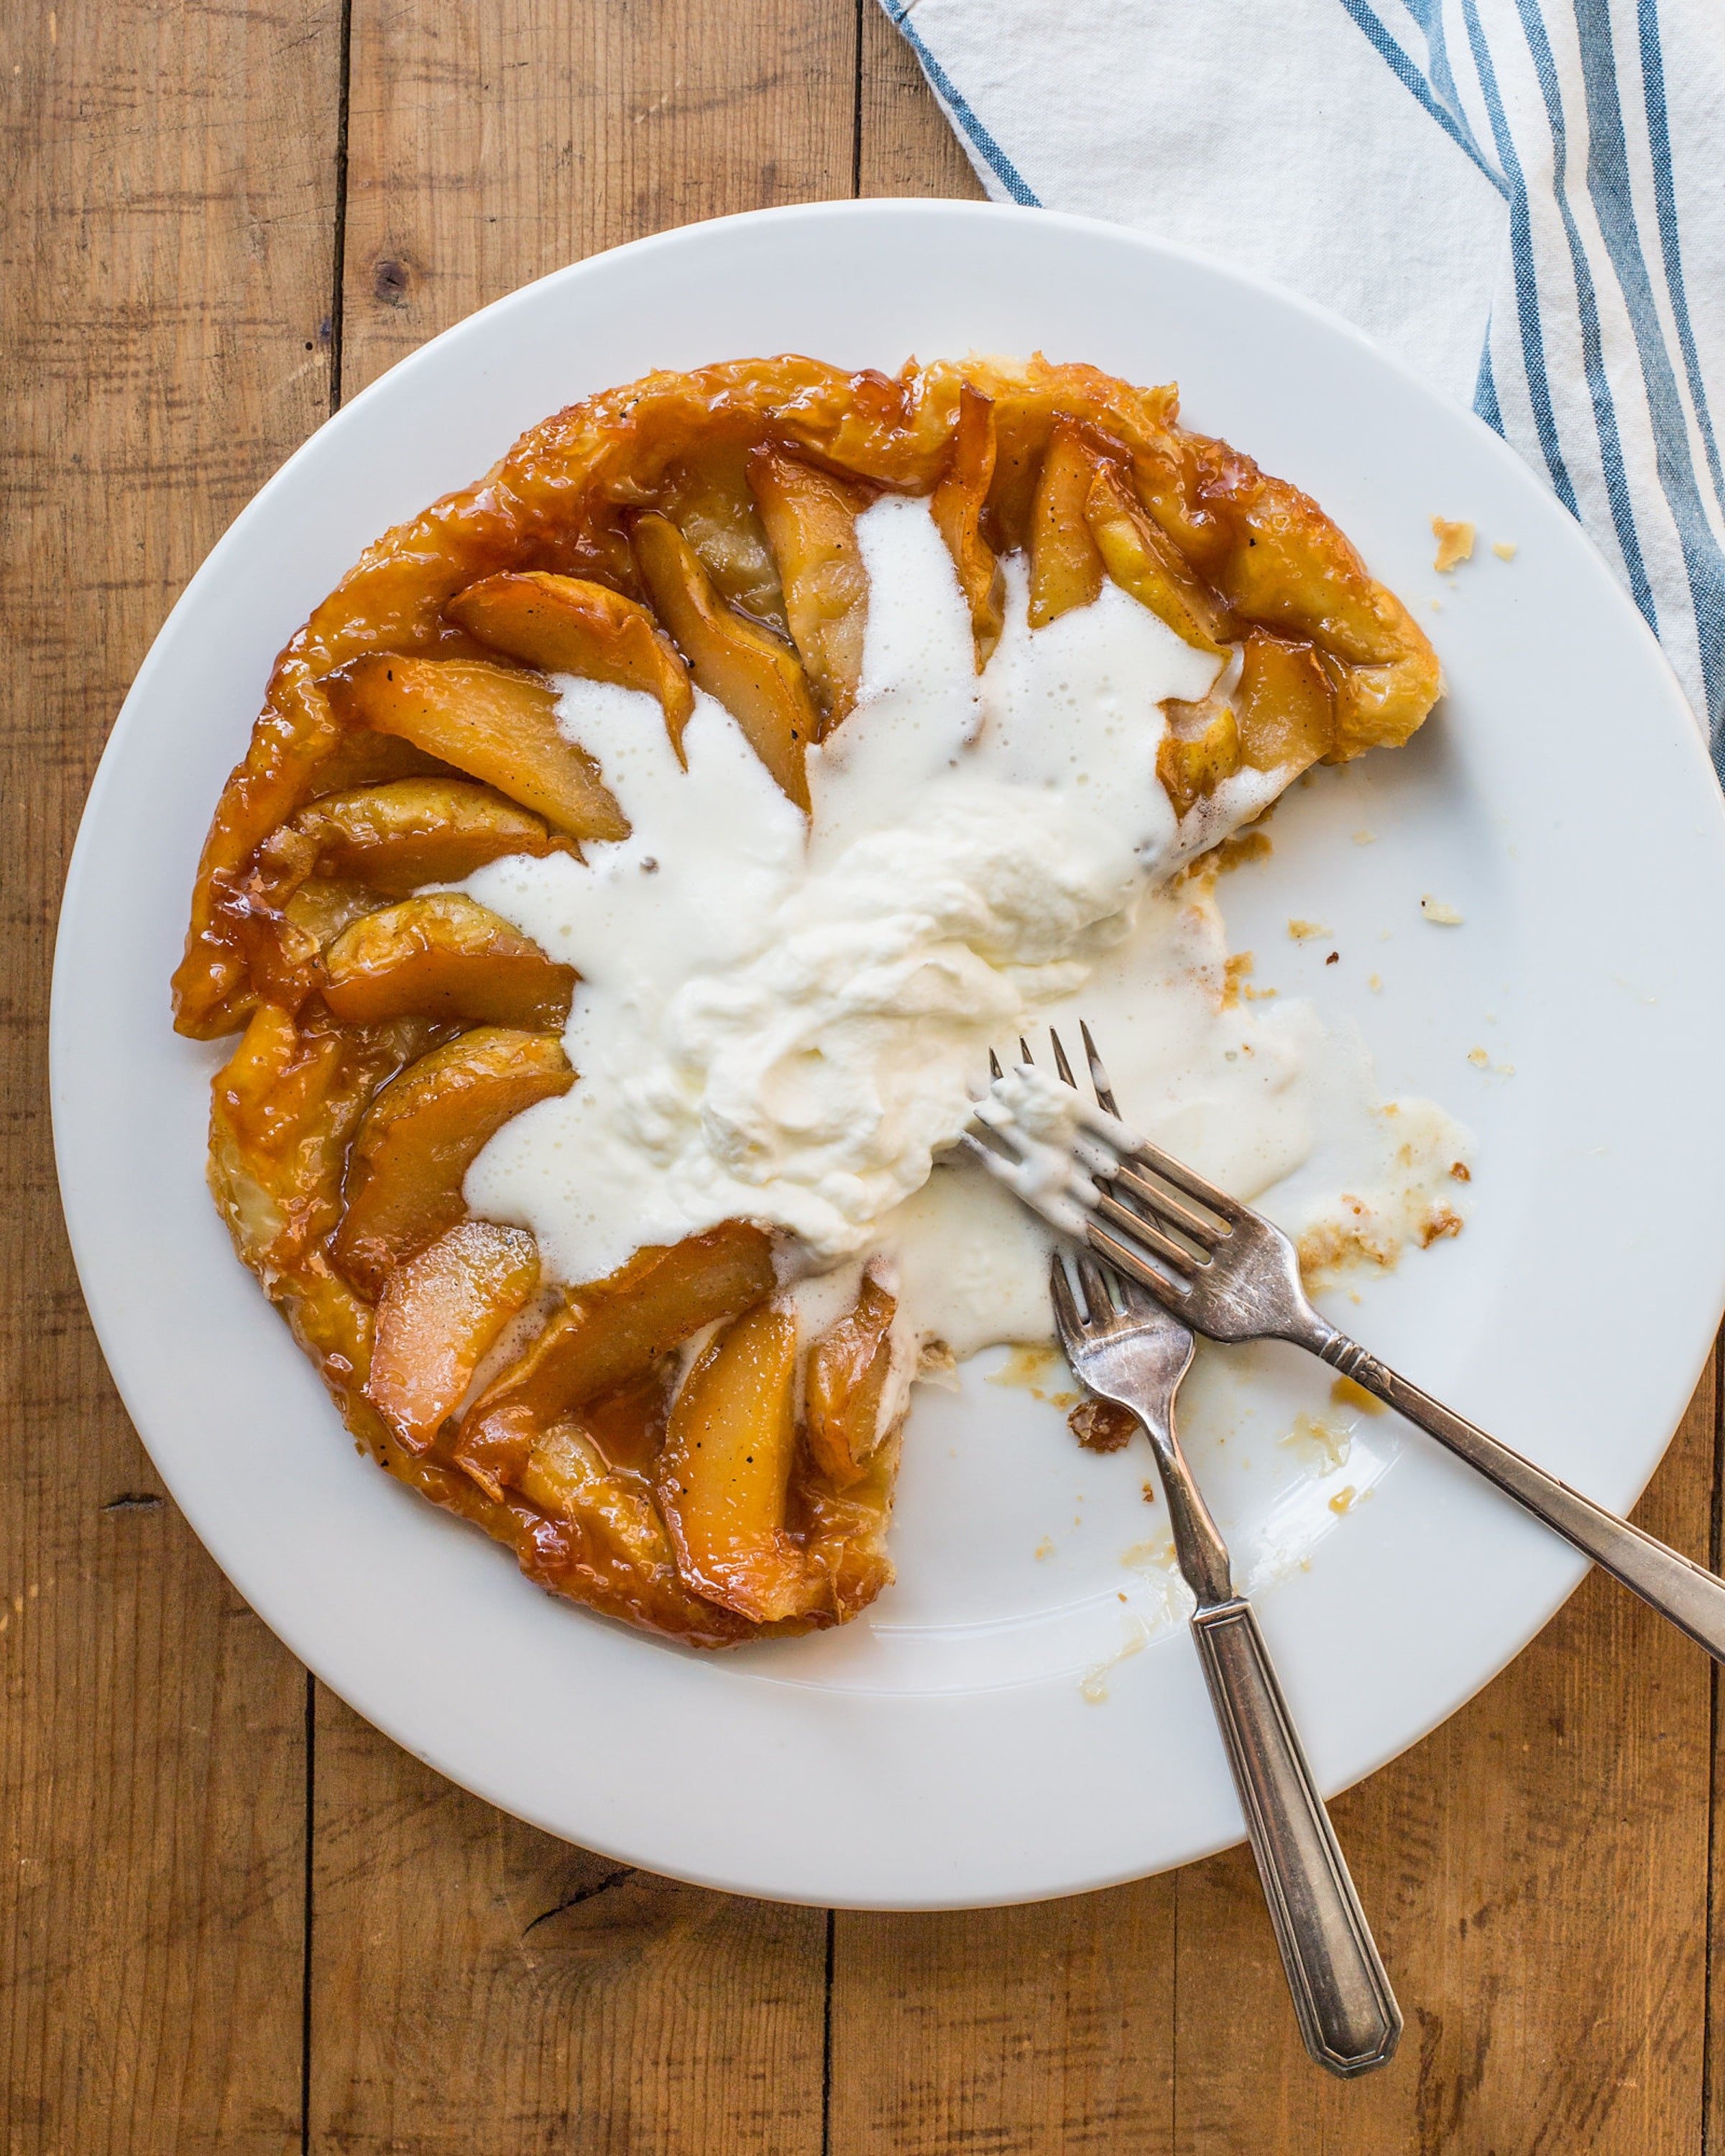 Pear Tartin Tatin with two forks on a plate.